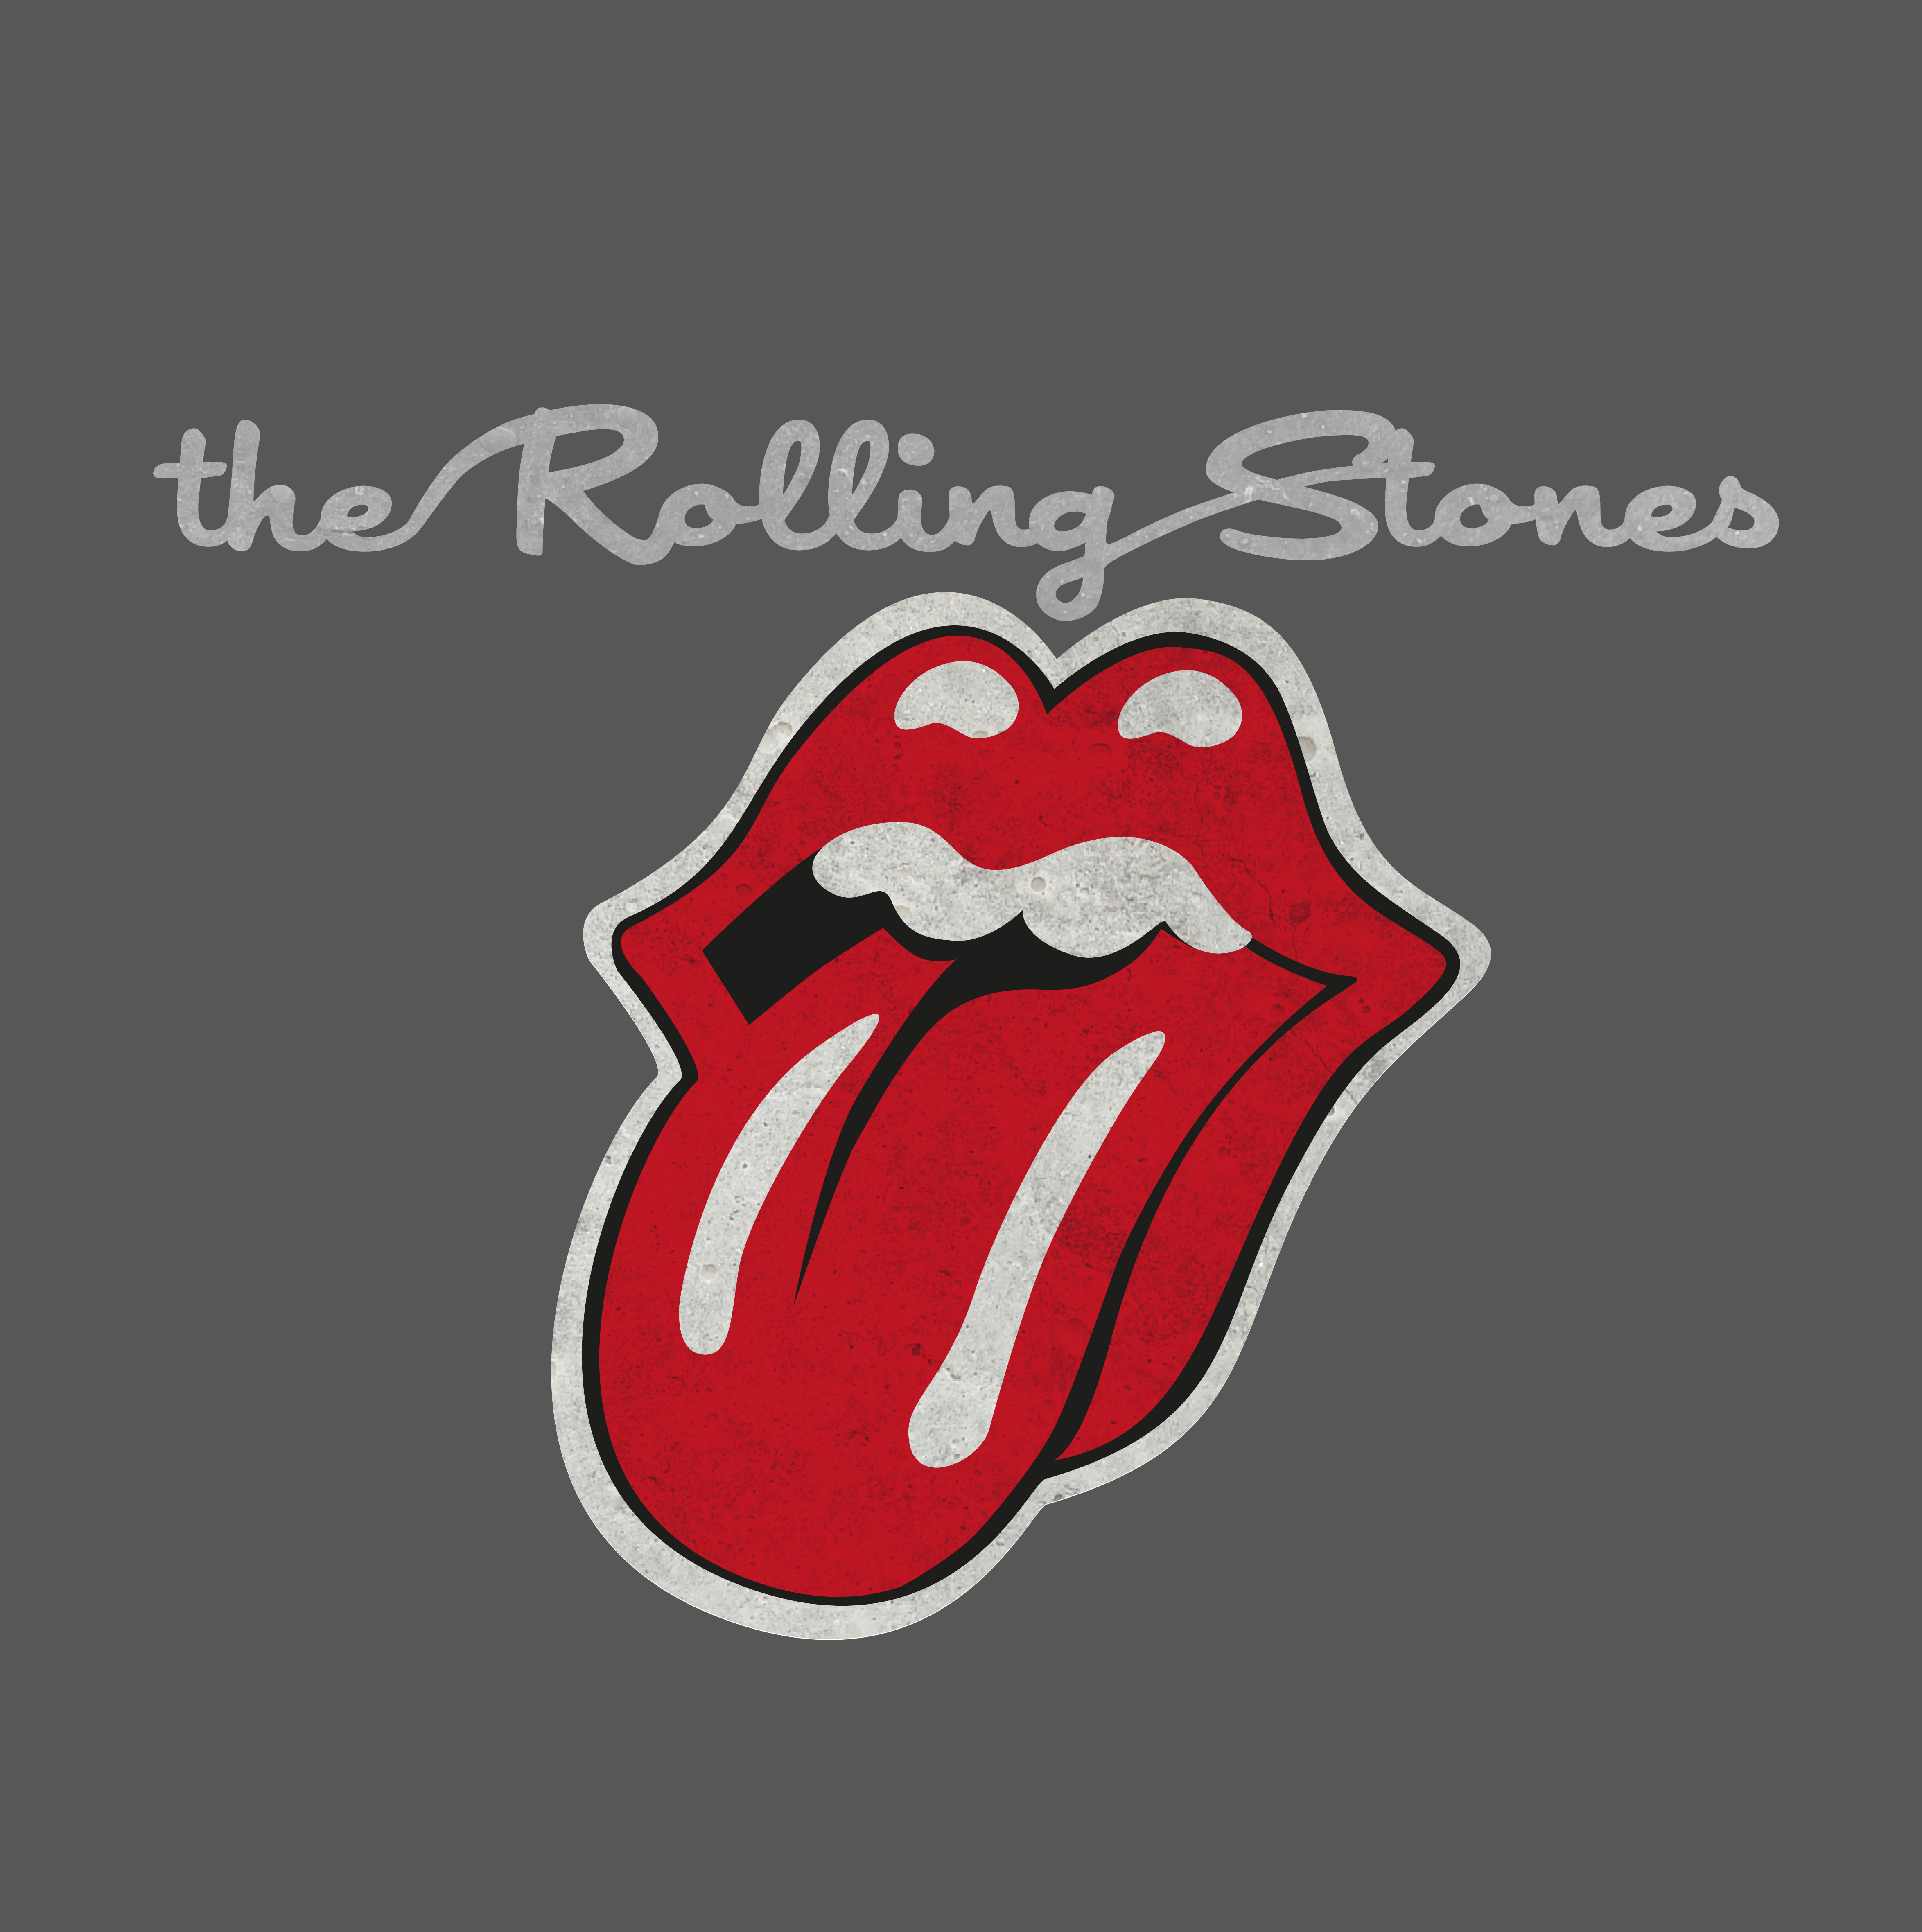 image about Like a Rolling Stone